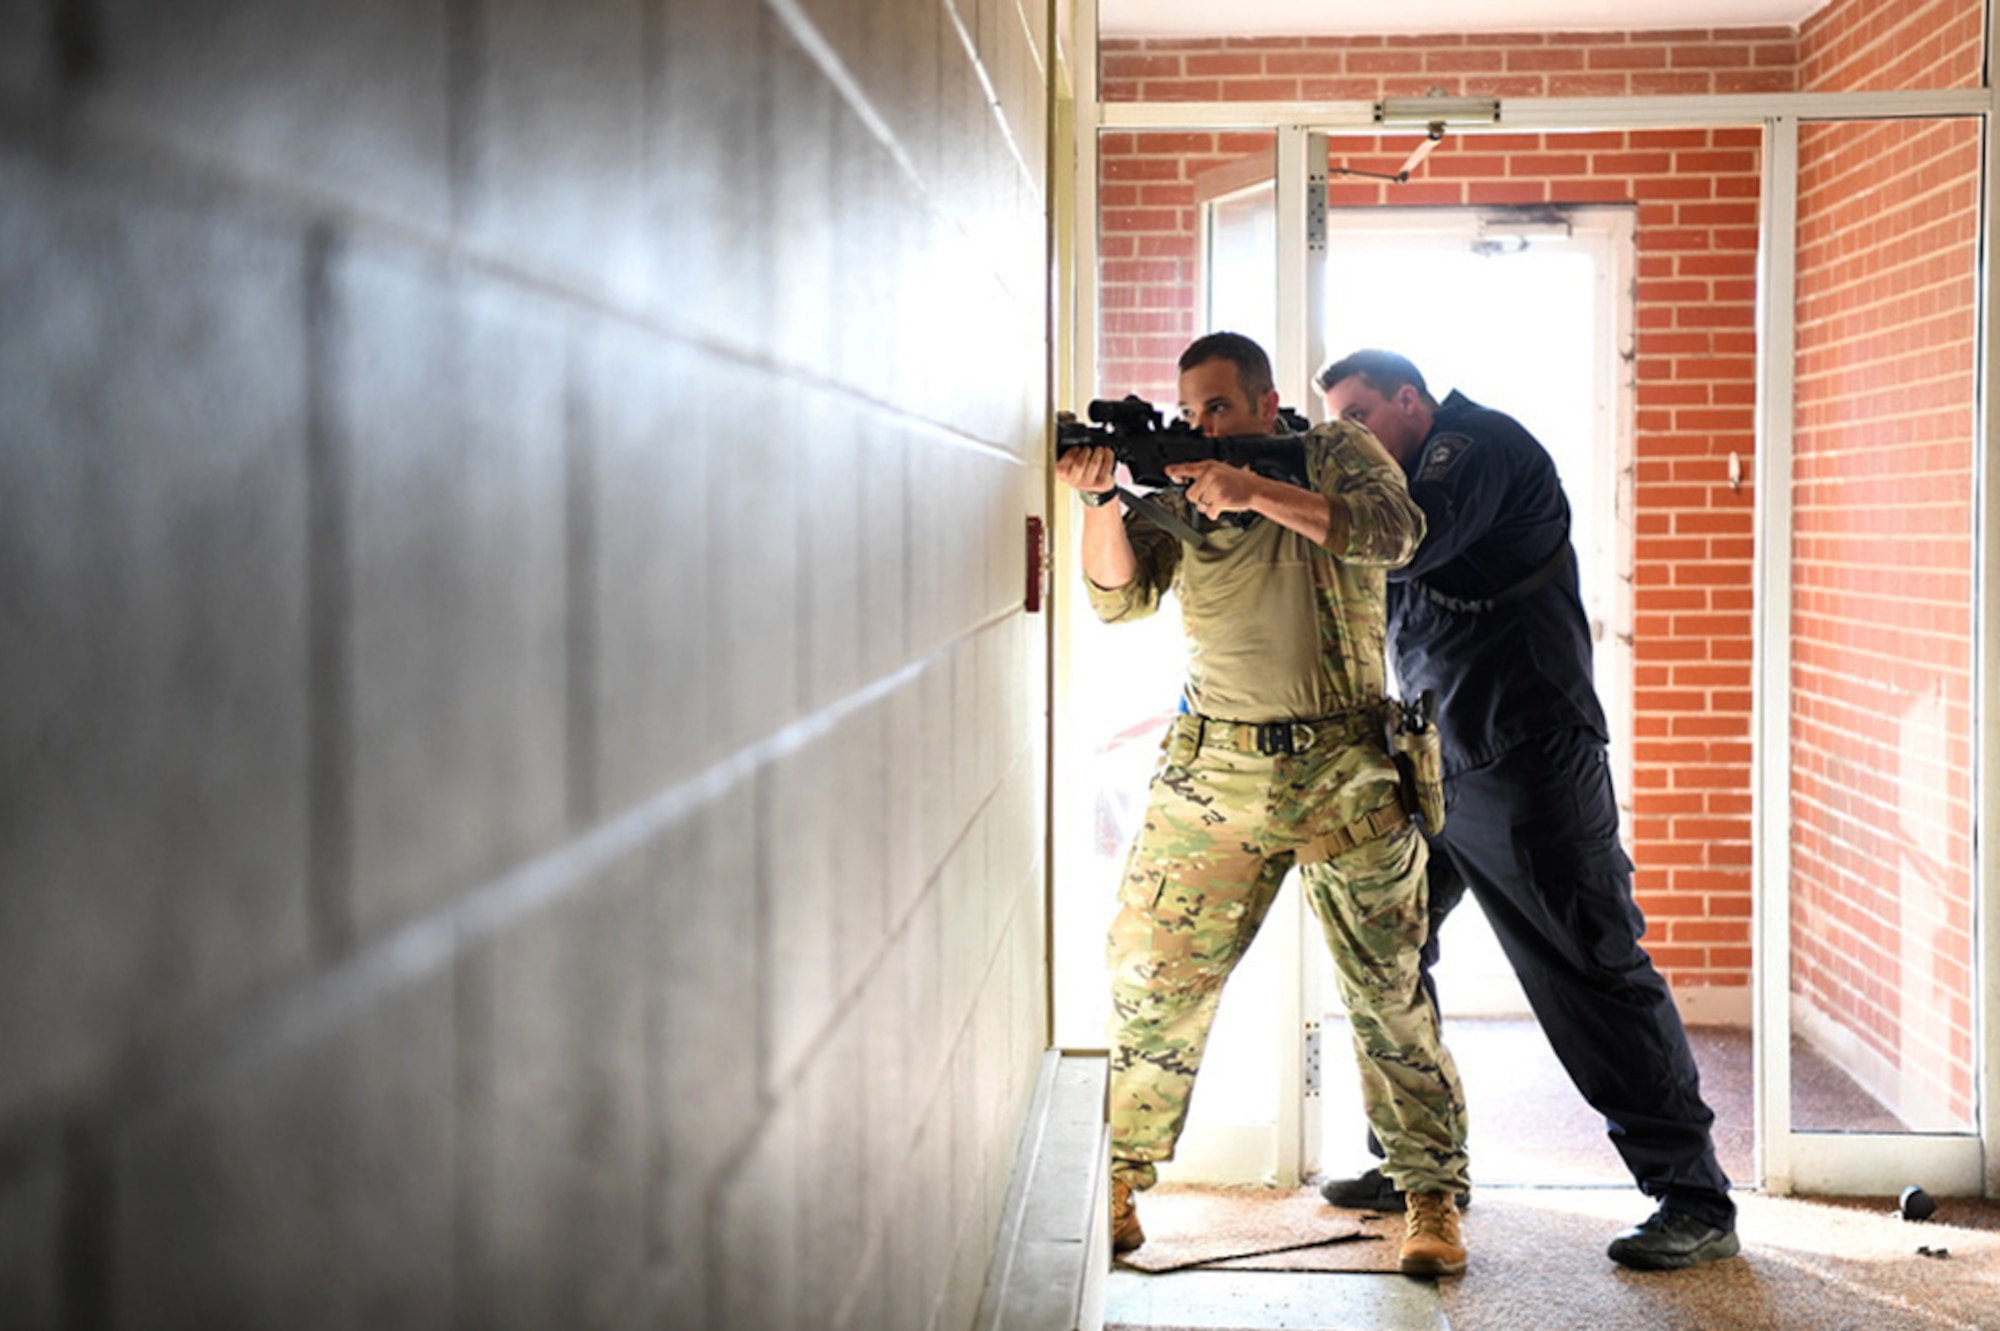 The Ohio Tactical Officers Association (OTOA) provided advanced team tactics training to members of local law enforcement, Oct. 22, 2019, at Springfield-Beckley Air National Guard Base in Springfield, Ohio. Facilities at the Ohio Air National Guard's 178th Wing provided a unique, cost-effective training environment for members of the Springfield Police Department SWAT and Clark County Narcotics Unit to strengthen their skills. (U.S. Air National Guard photo by Staff Sgt. Rachel Simones)